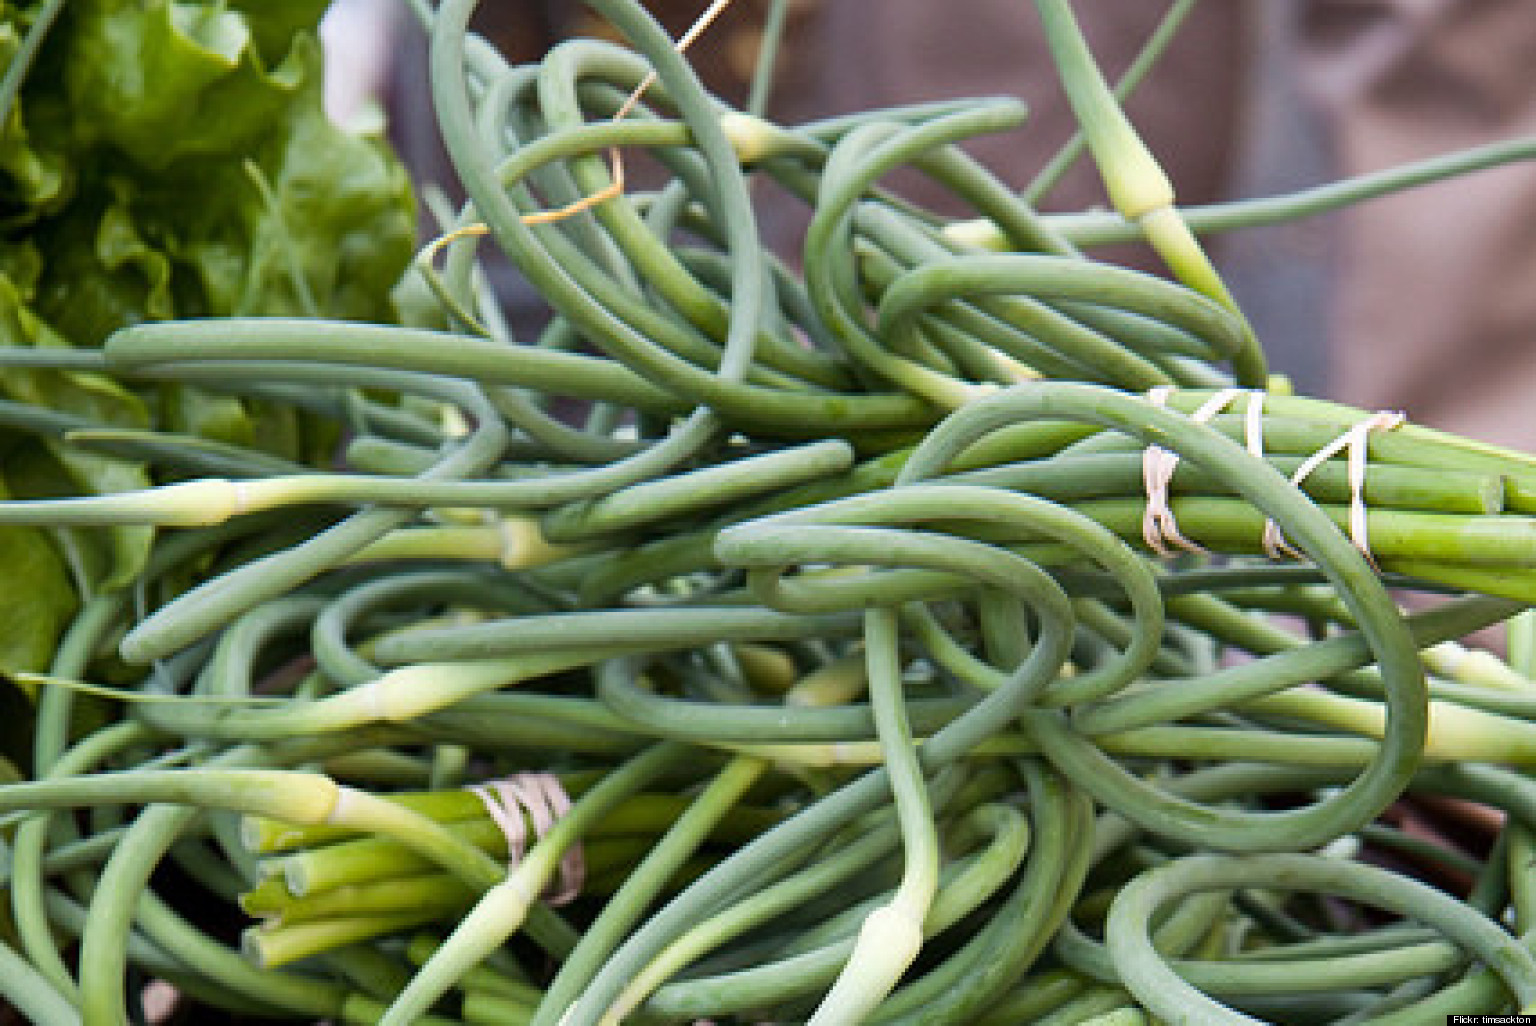 Recipes That Make The Most Of Garlic Scapes